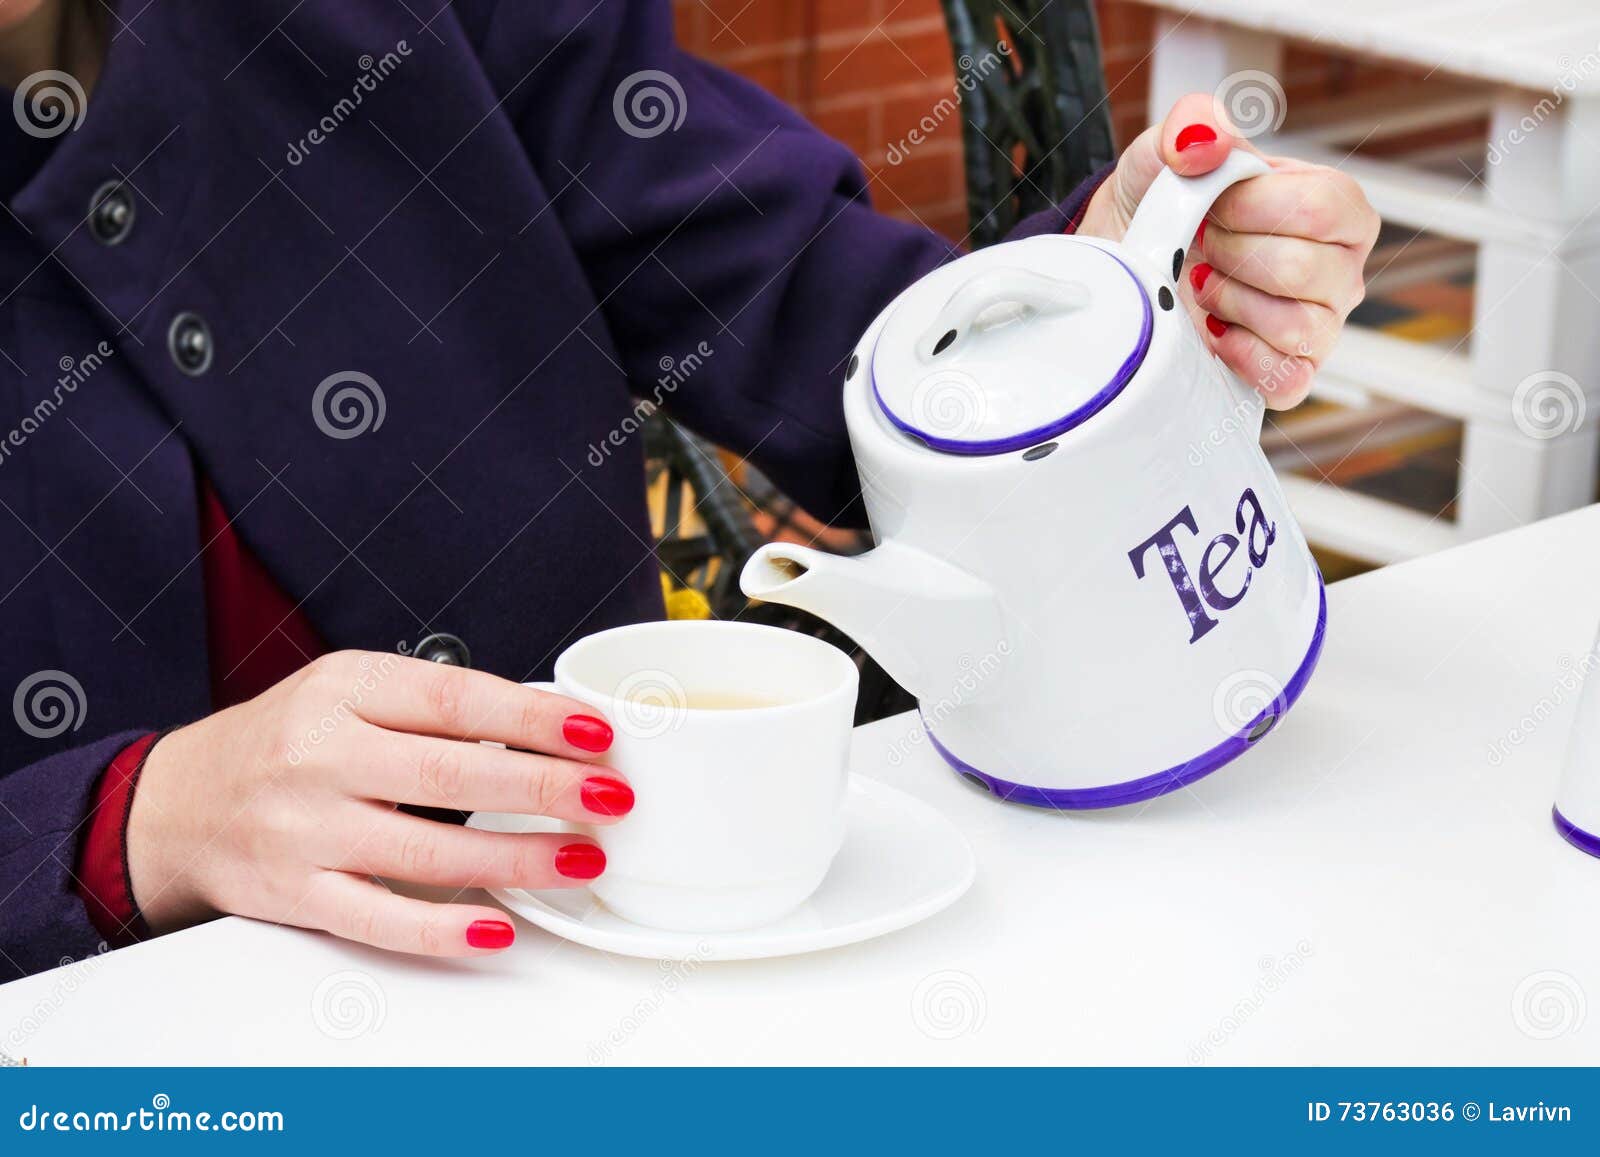 woman with red nail polish pouring a tee in a cup in a cafee